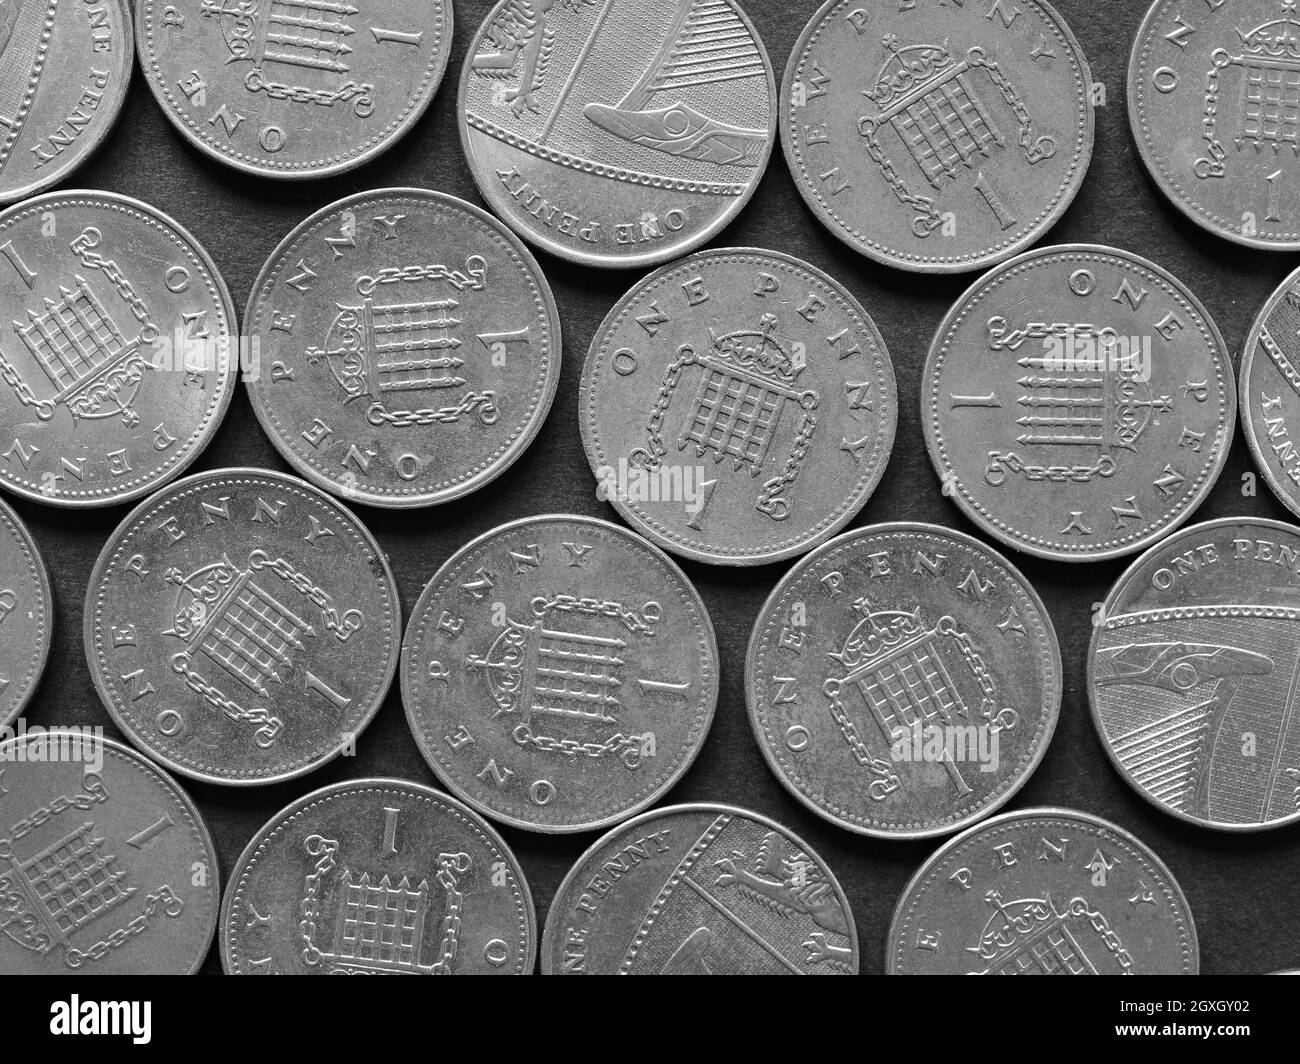 Pound coins money (GBP), currency of United Kingdom, over black background in black and white Stock Photo